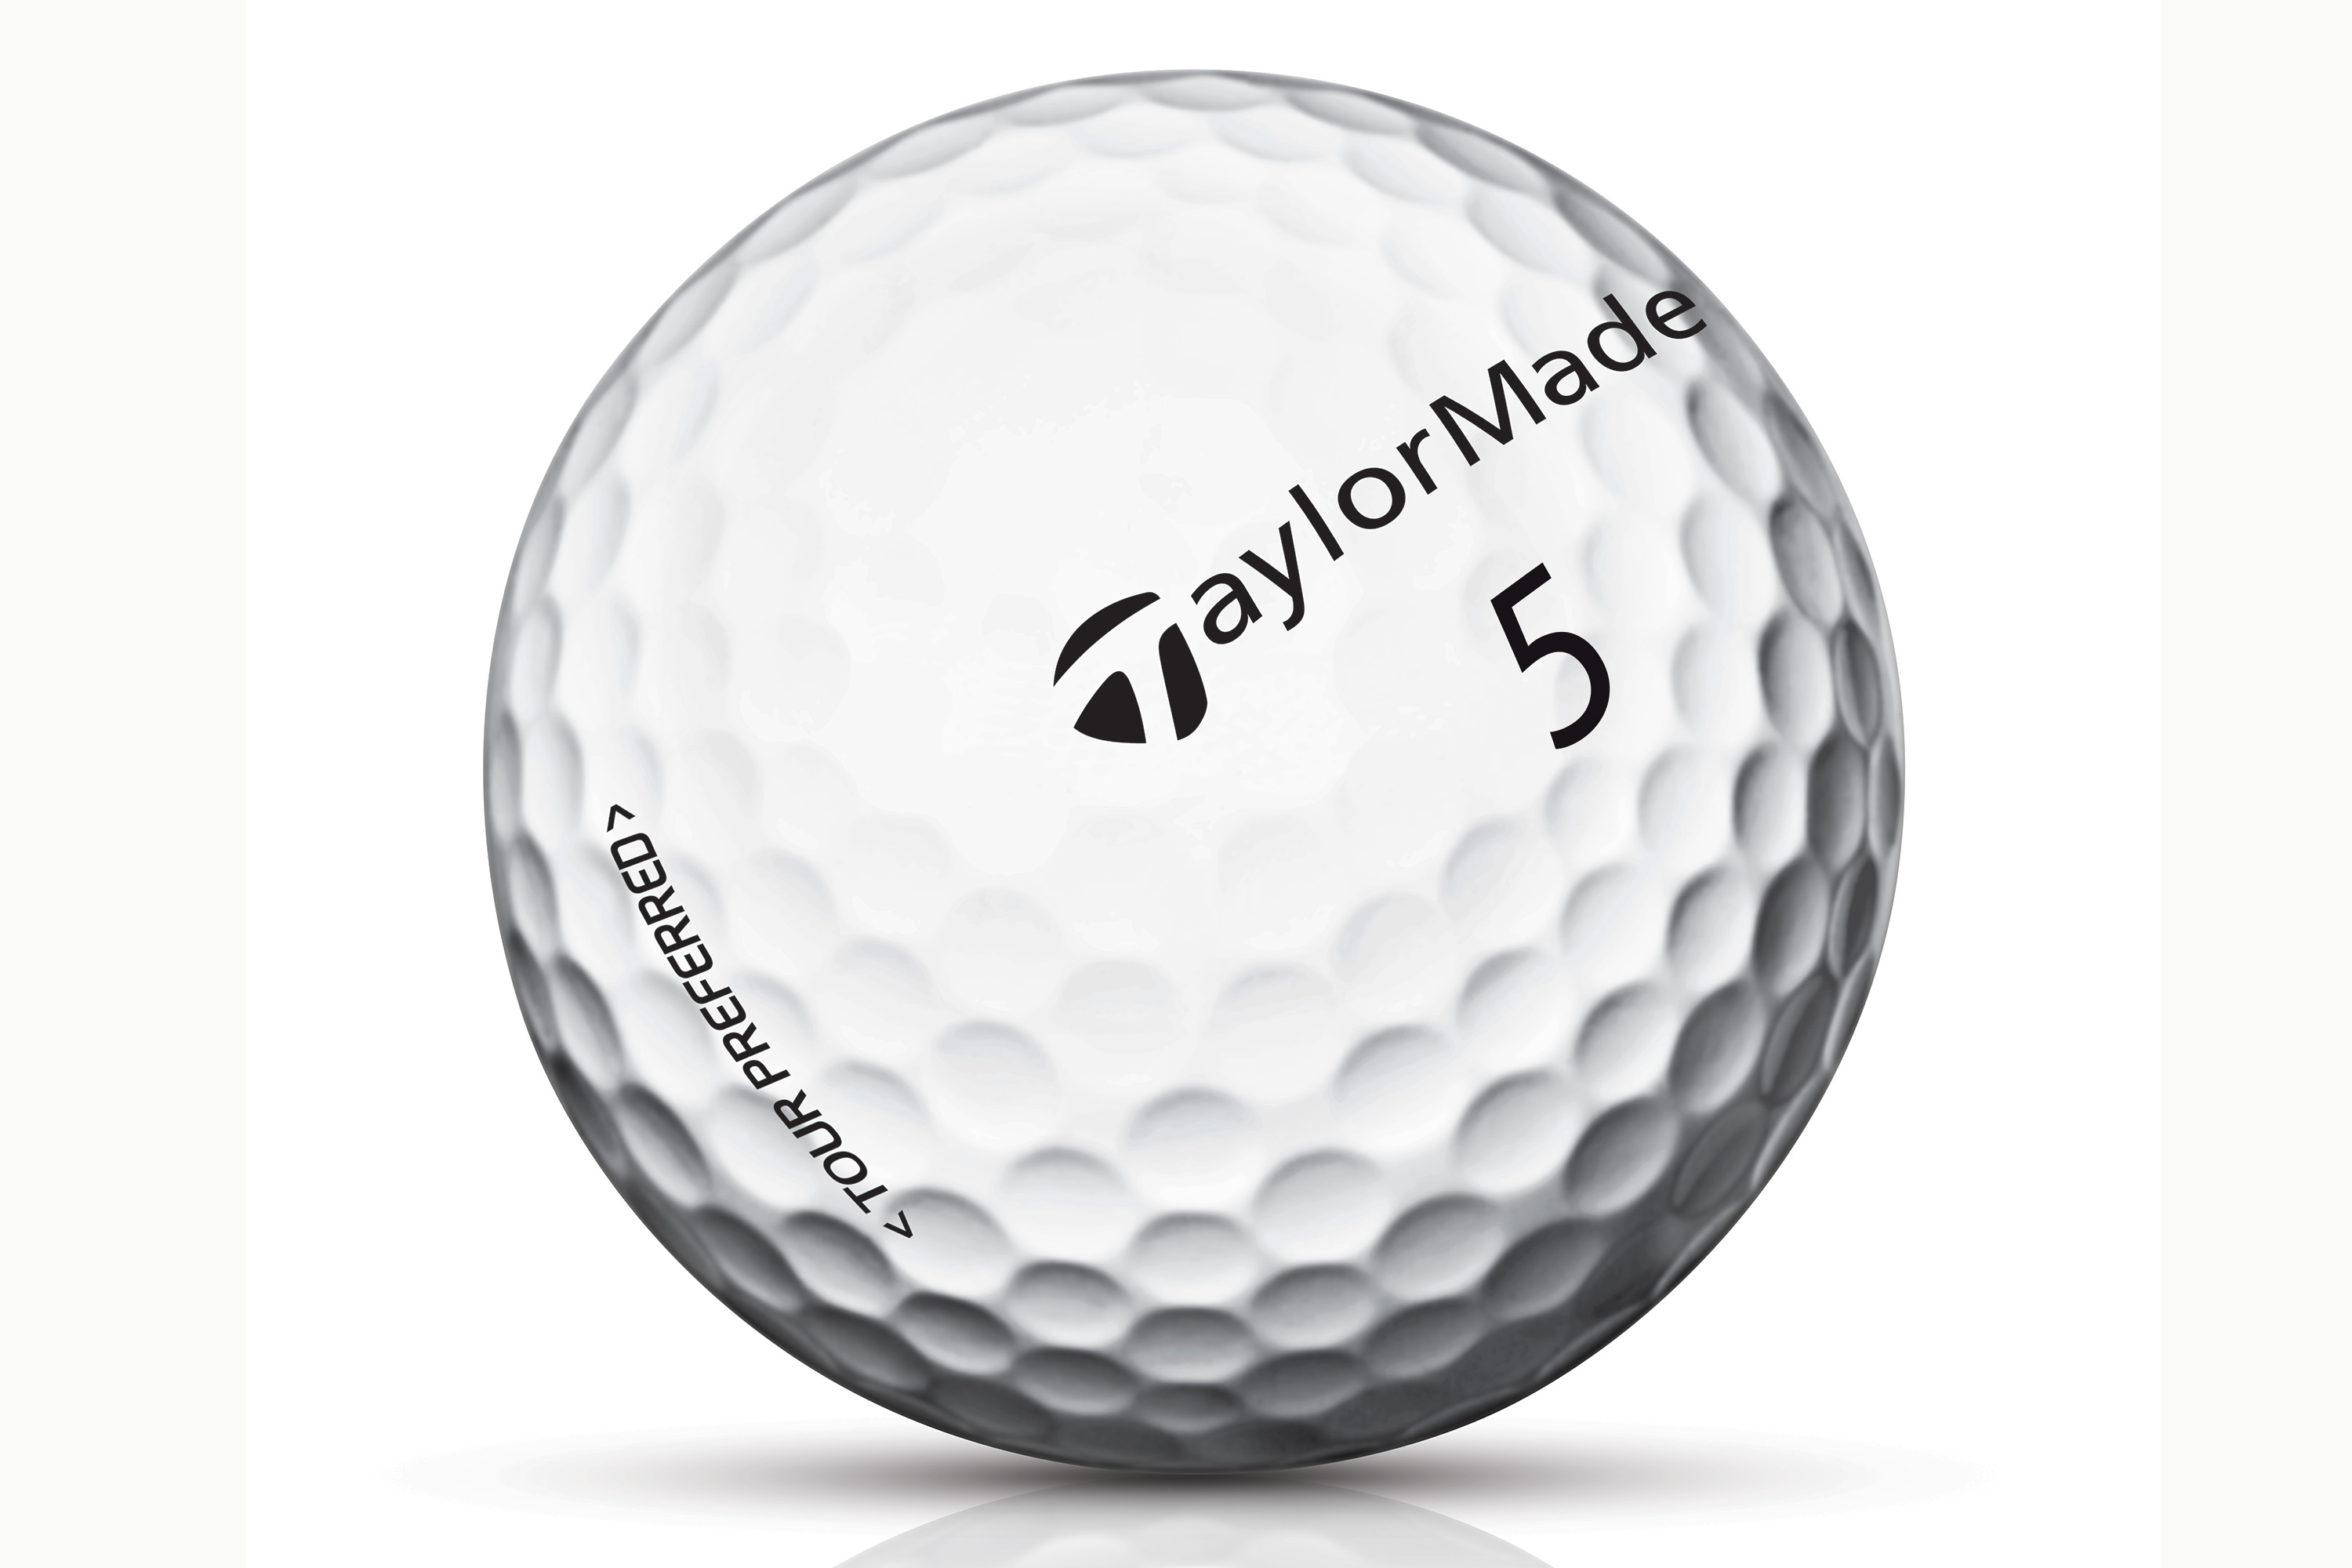 TaylorMade Tour Preferred ball 